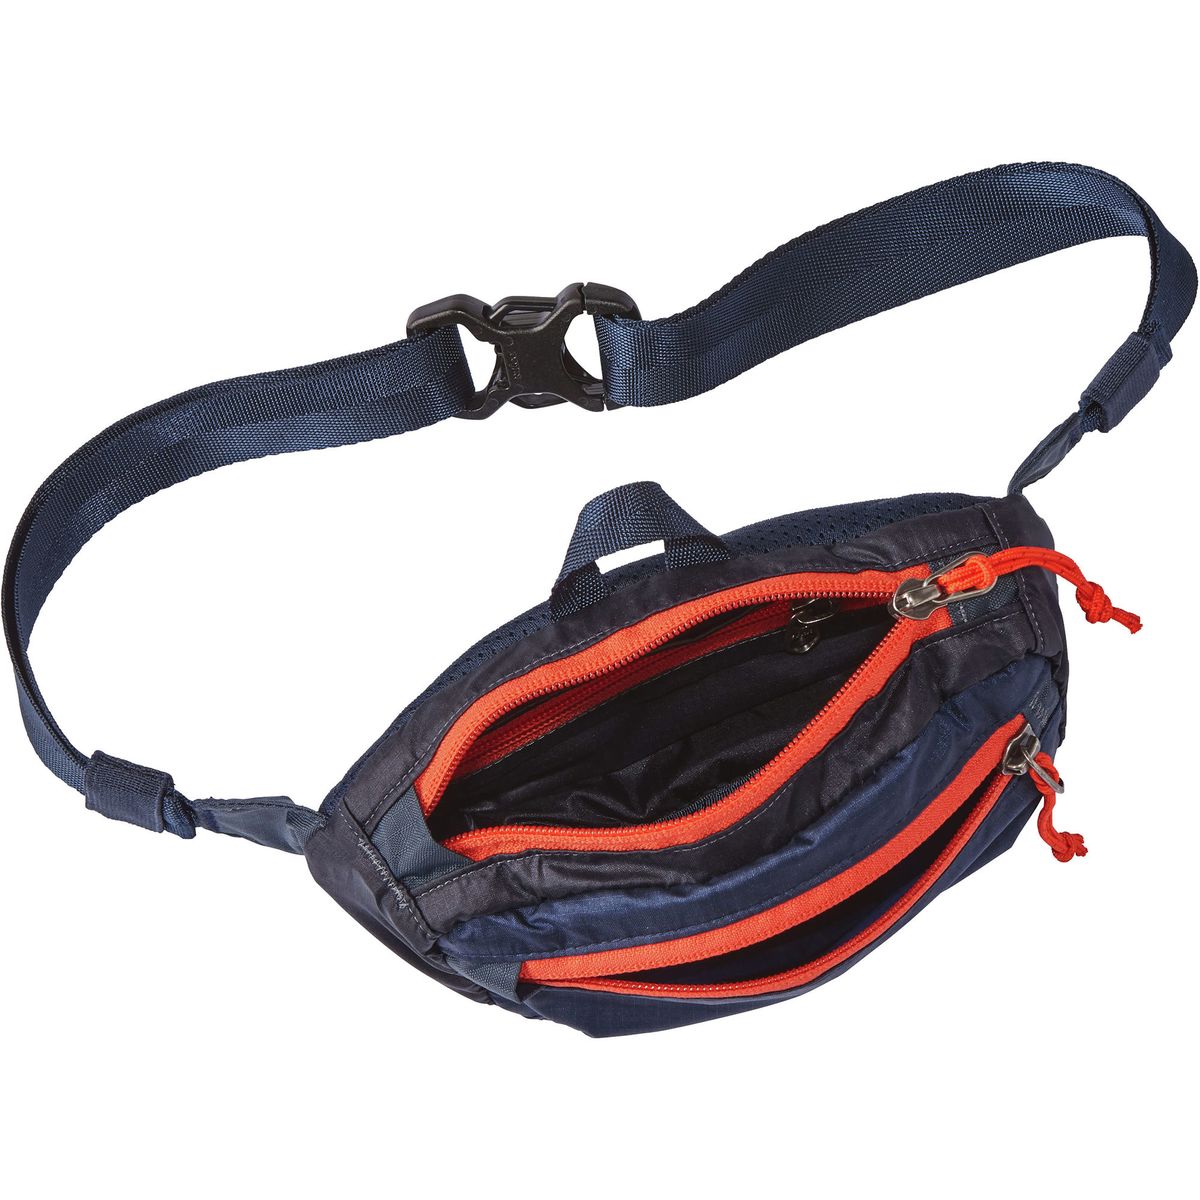 Patagonia Lightweight Travel Mini 1L Hip Pack | Backcountry.com